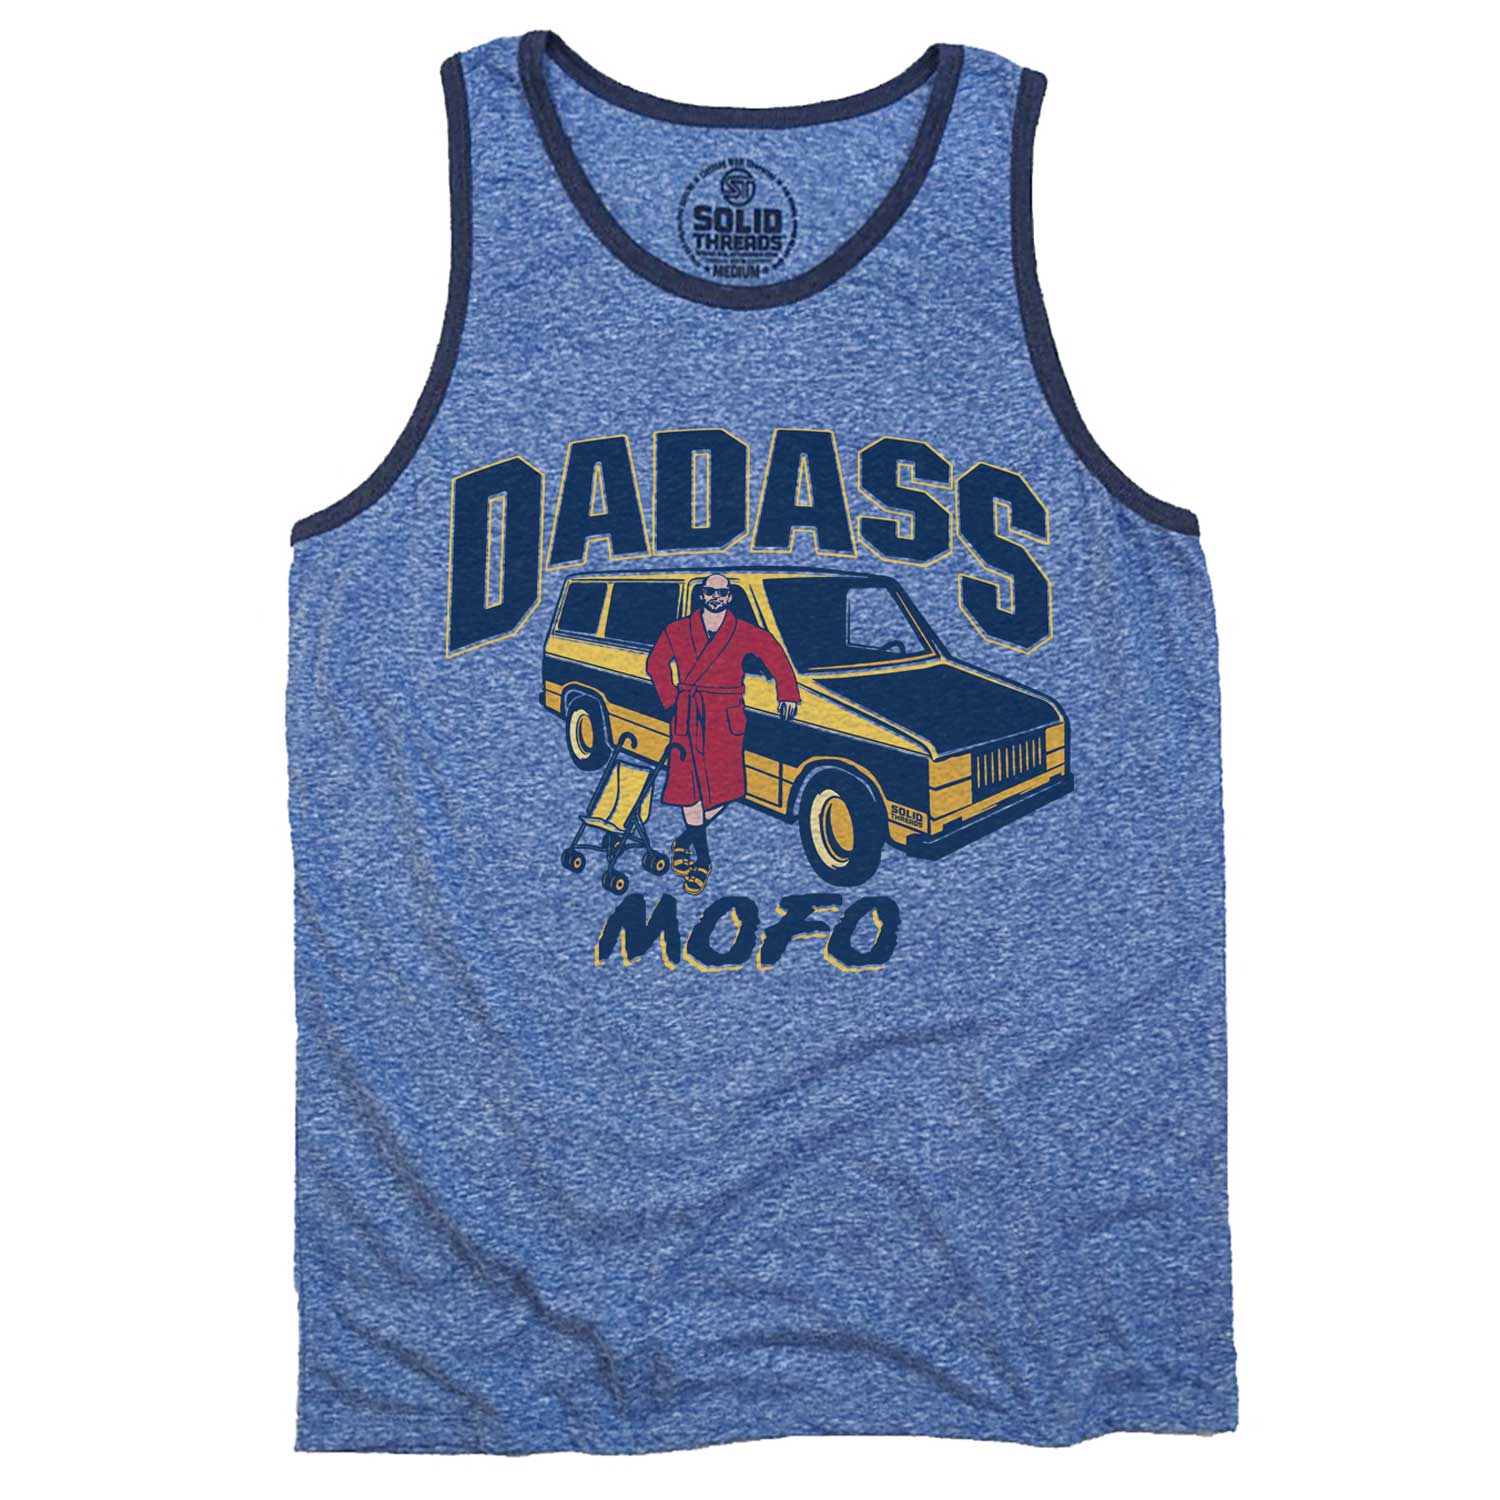 Men's Dadass Vintage Graphic Tank Top | Funny Dad T-shirt | Solid Threads